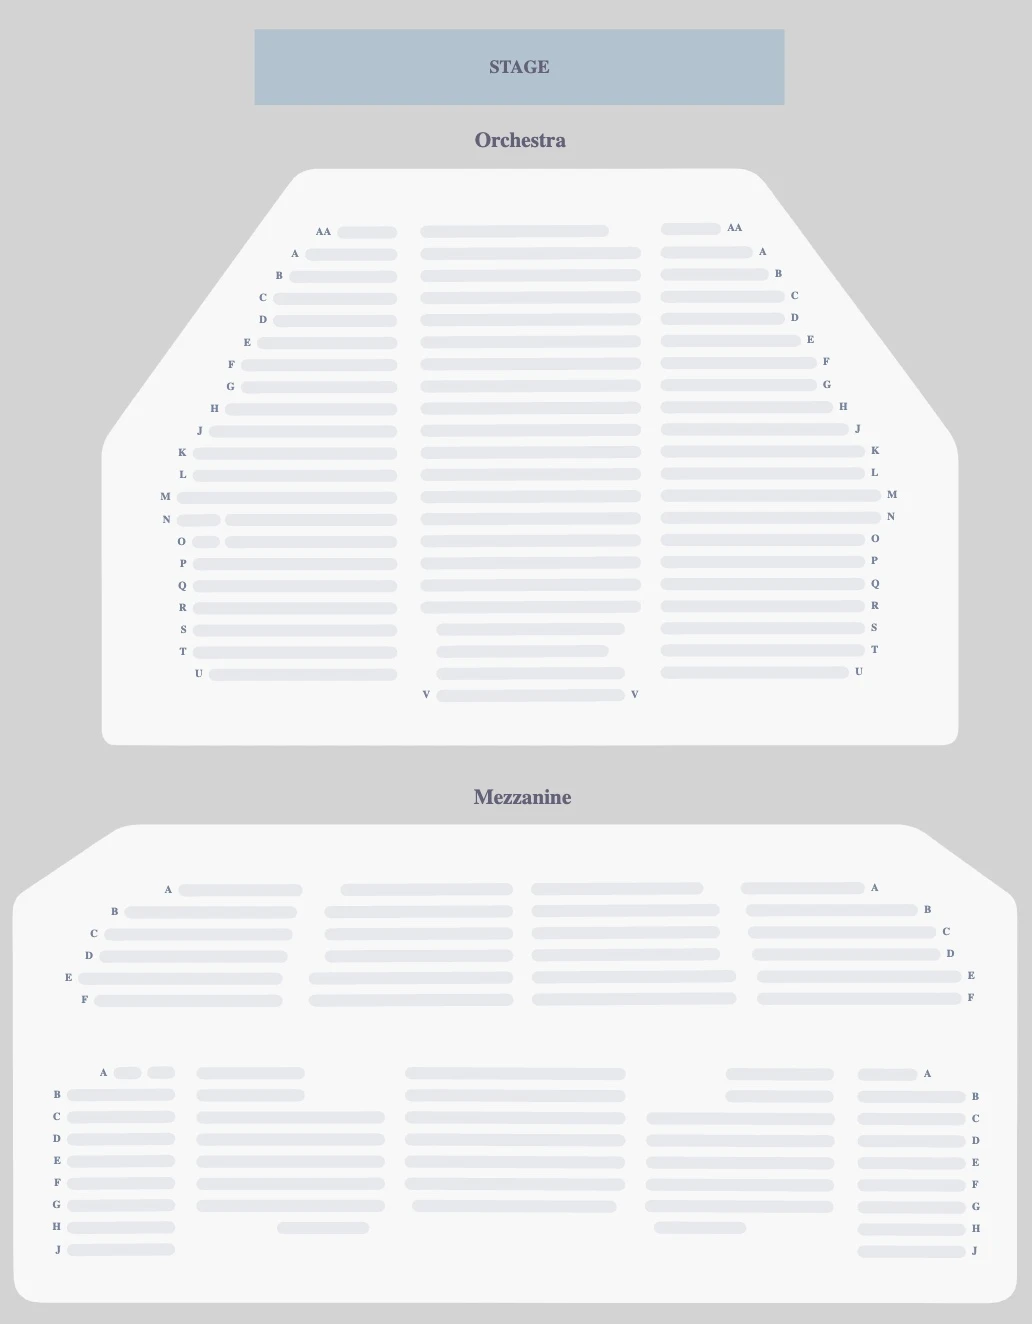 Imperial Theatre seating plan